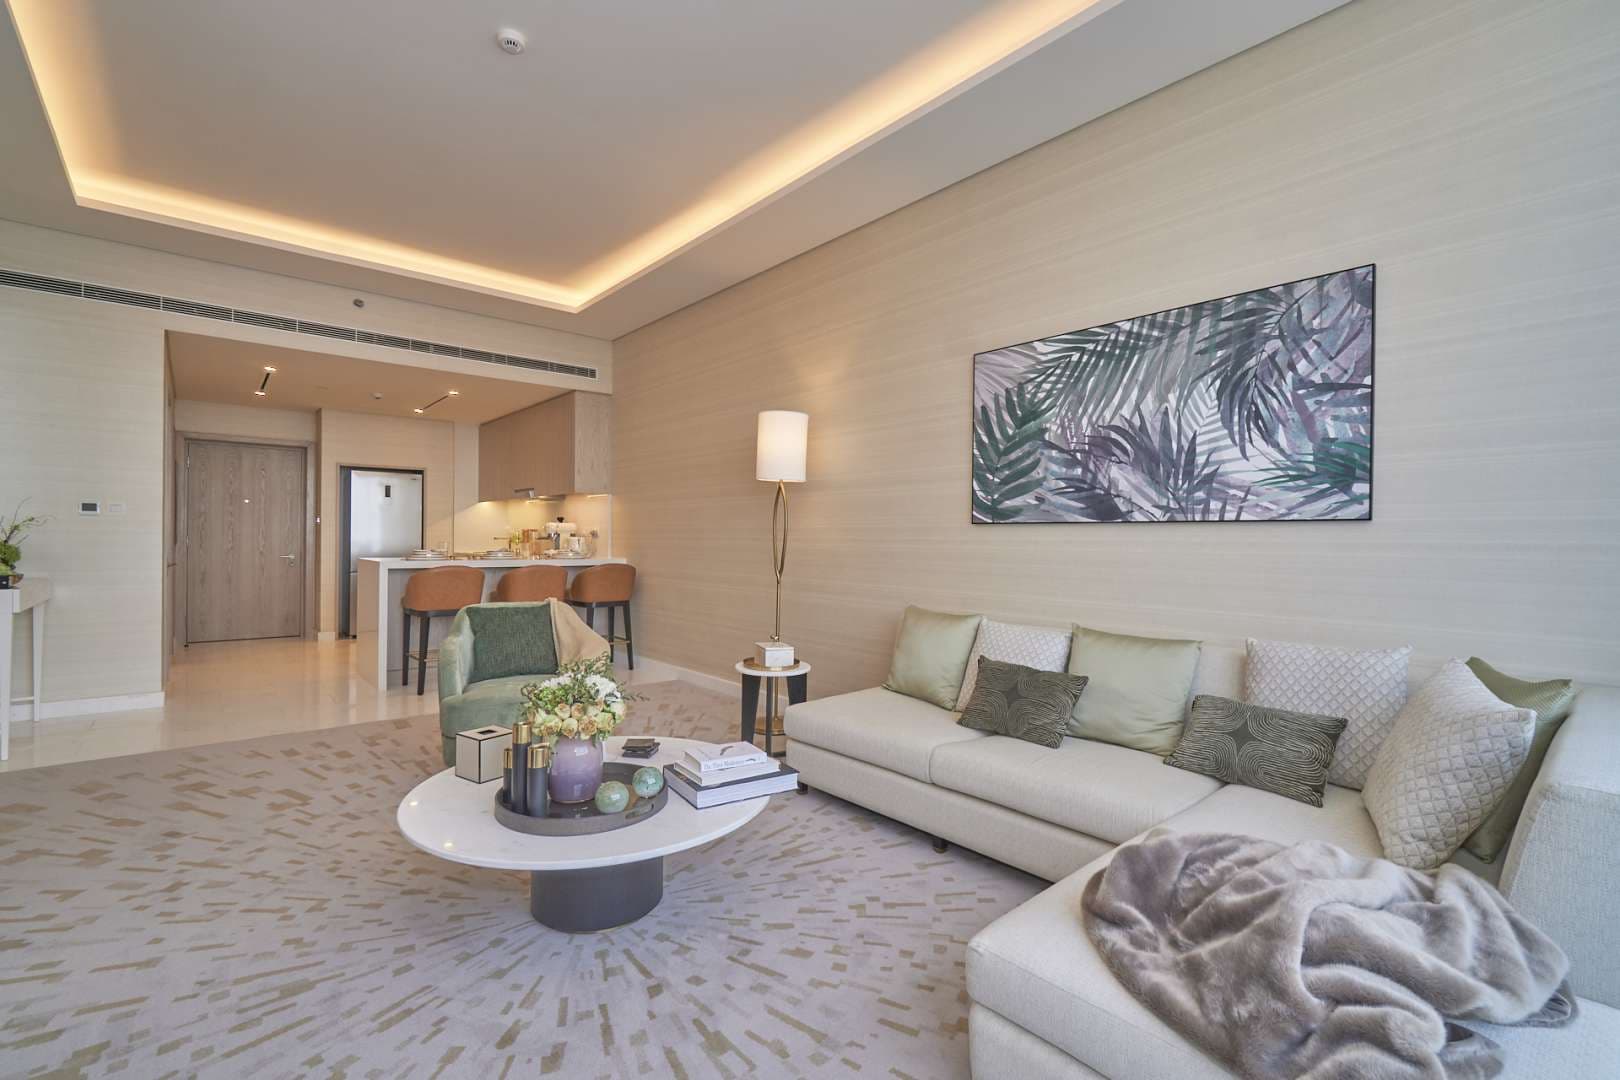 1 Bedroom Apartment For Sale The Palm Tower Lp07384 2d8b26feaf594400.jpg